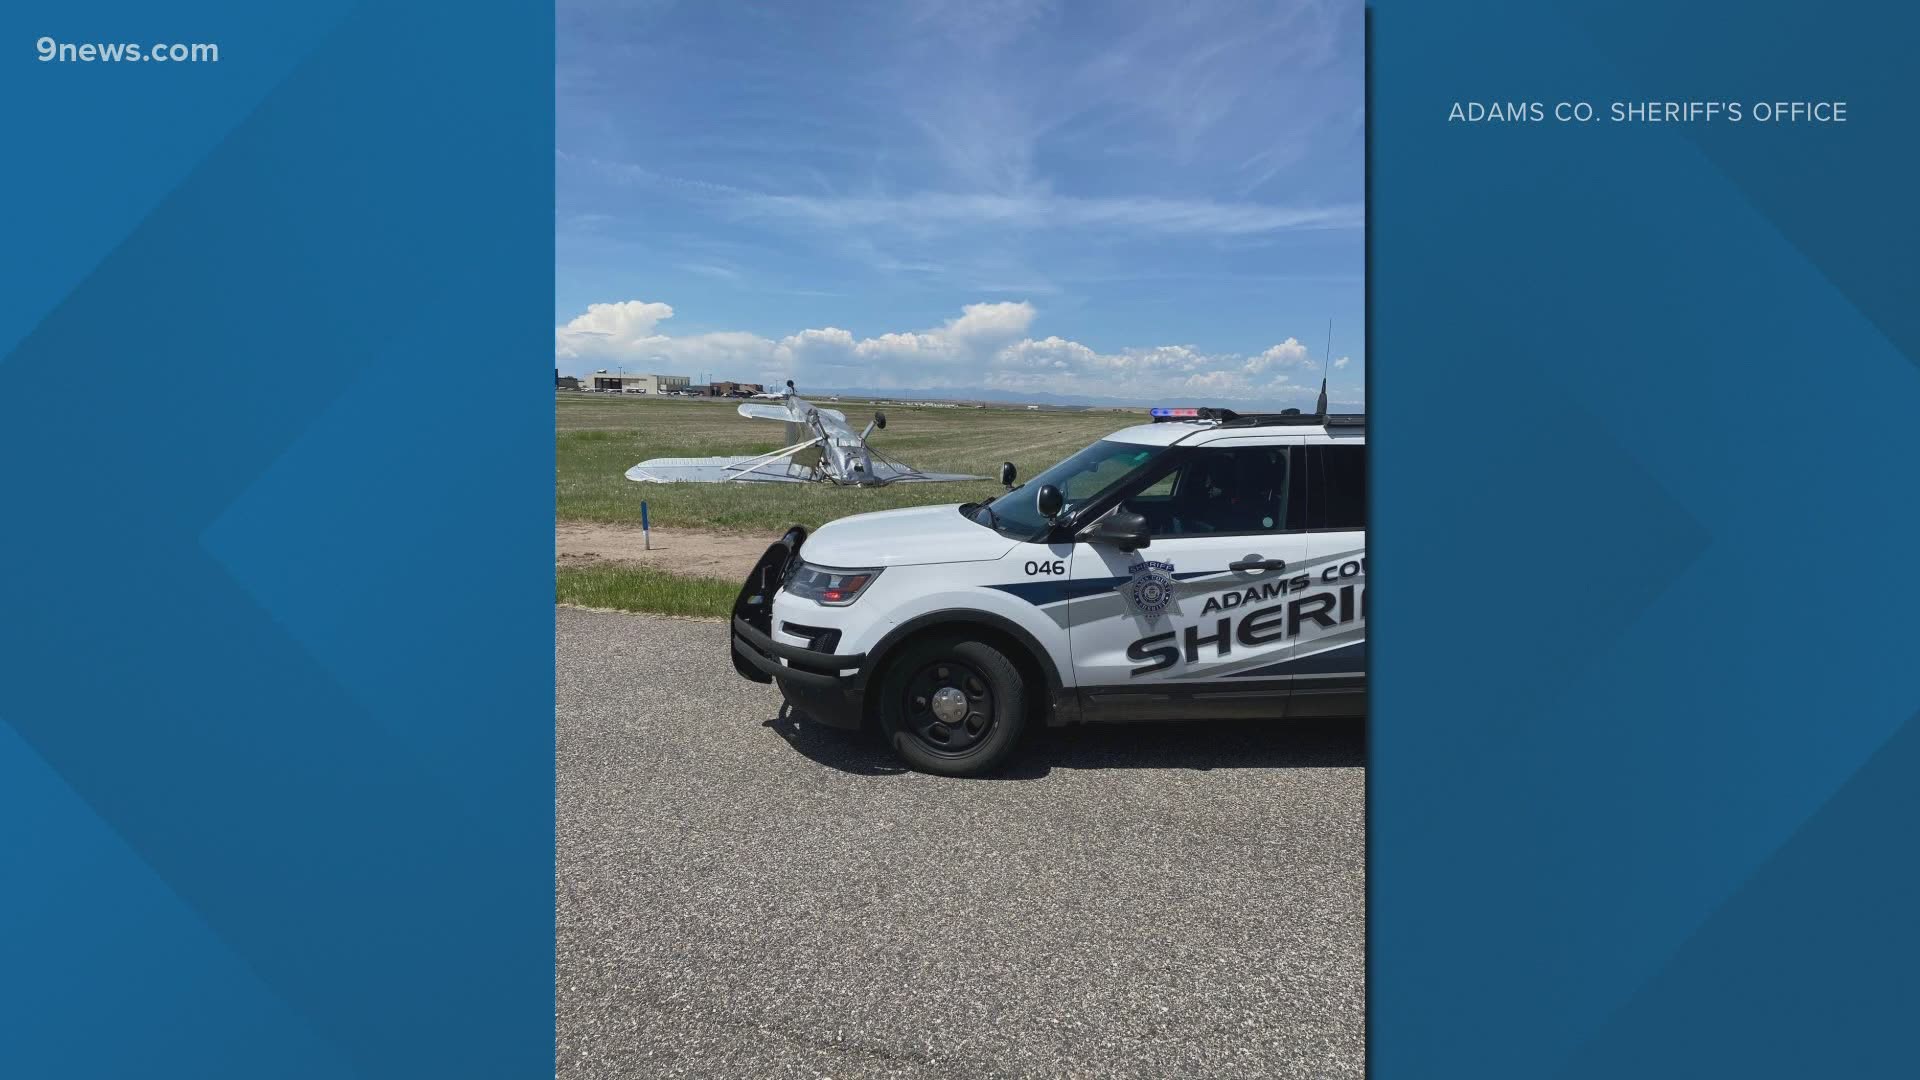 No one was injured when wind pushed the plane off the runway, according to the sheriff's office.